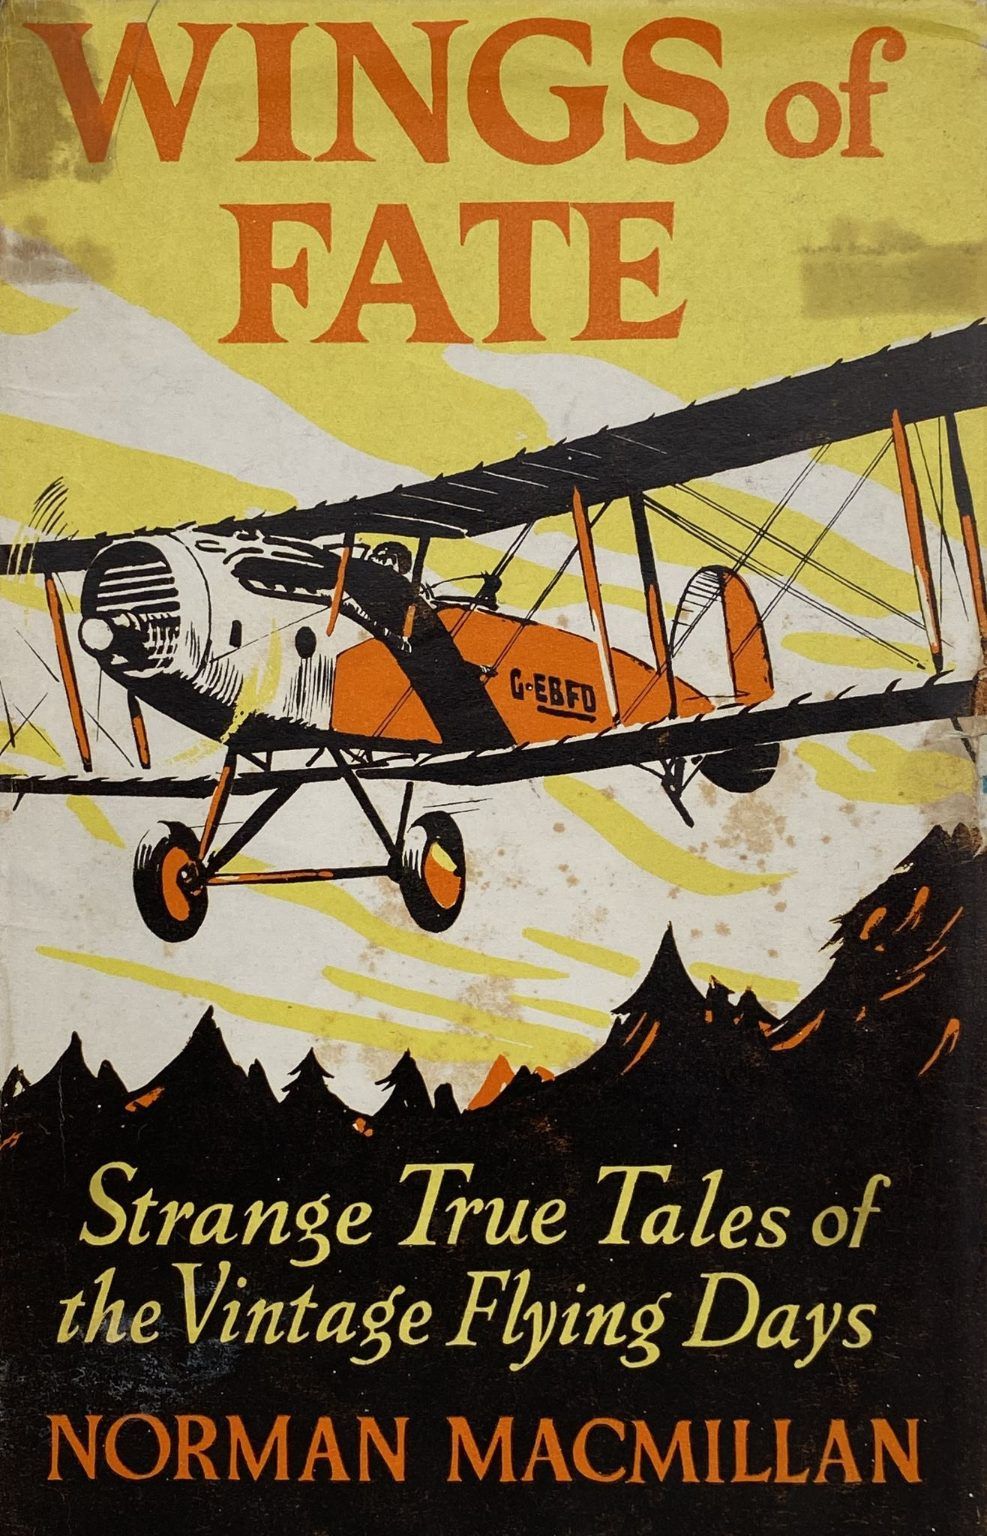 WINGS OF FATE: Strange True Tales of The Vintage Flying Days